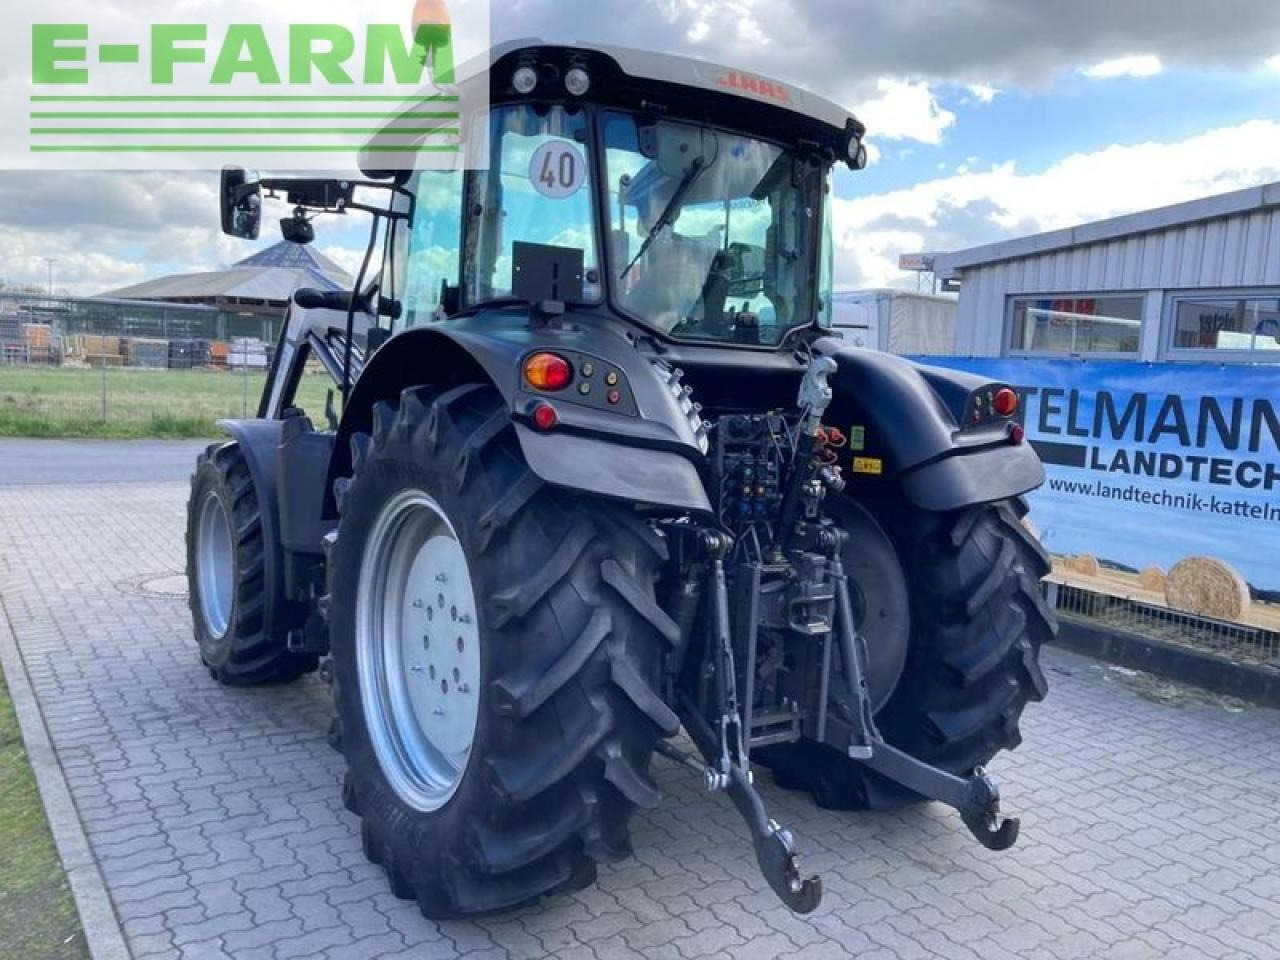 Farm tractor CLAAS arion 430 cis-panoramic